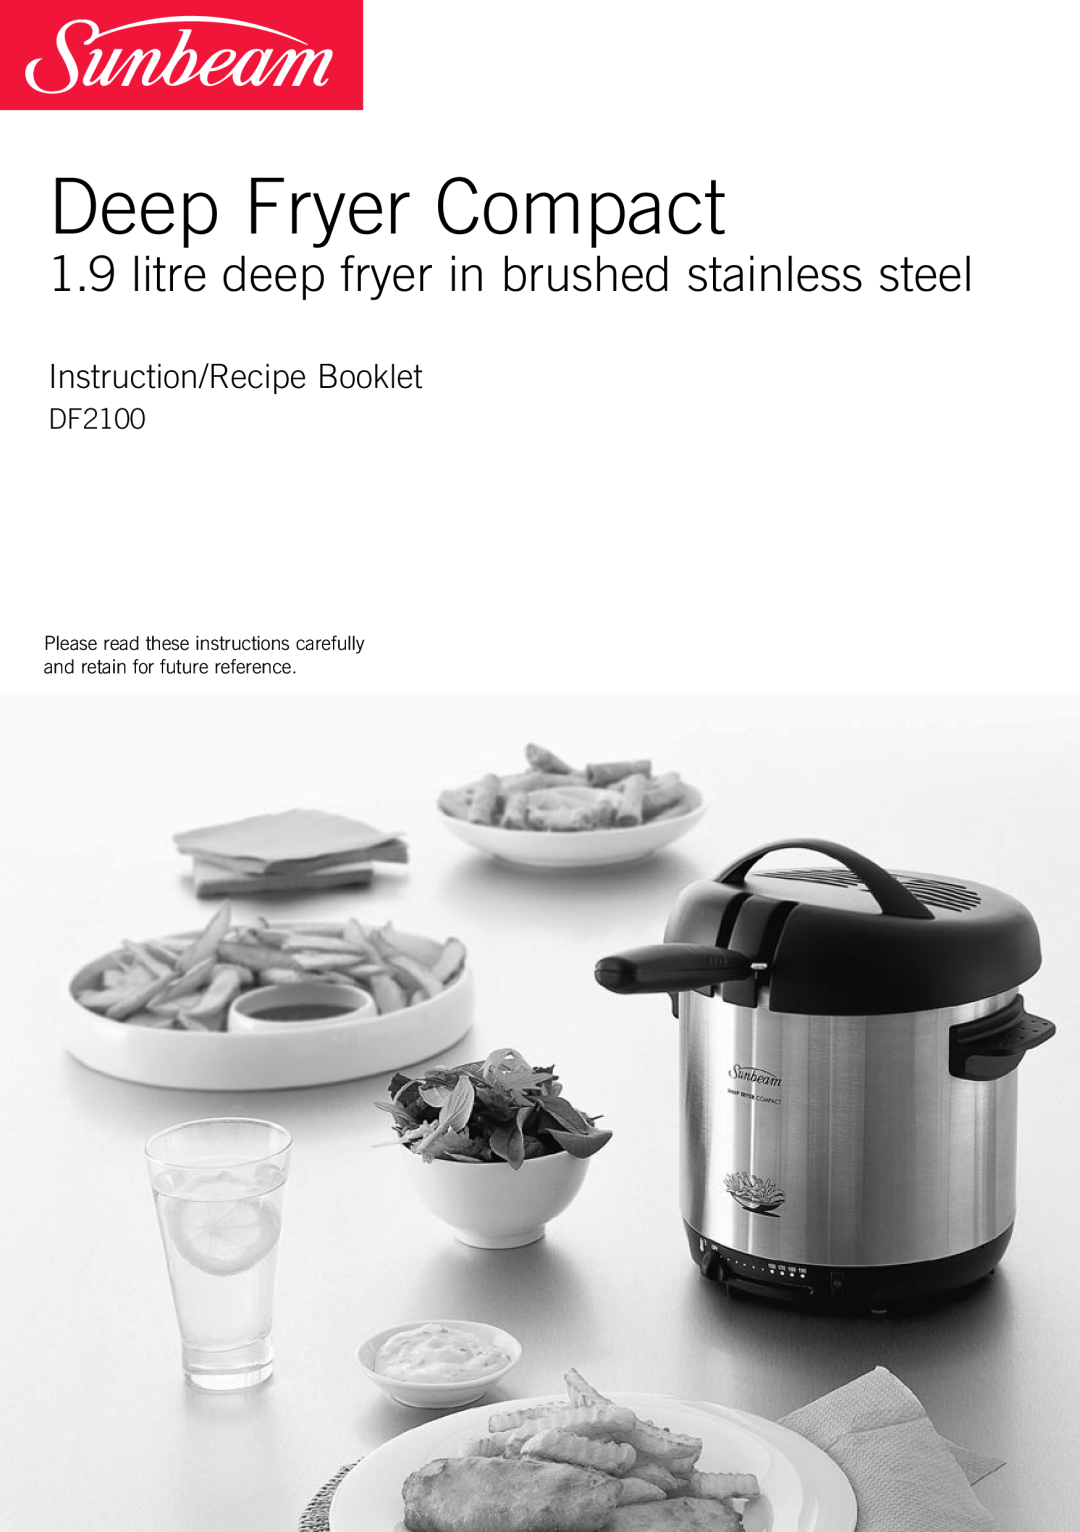 Sunbeam DF2100 manual Deep Fryer Compact, litre deep fryer in brushed stainless steel, Instruction/Recipe Booklet 